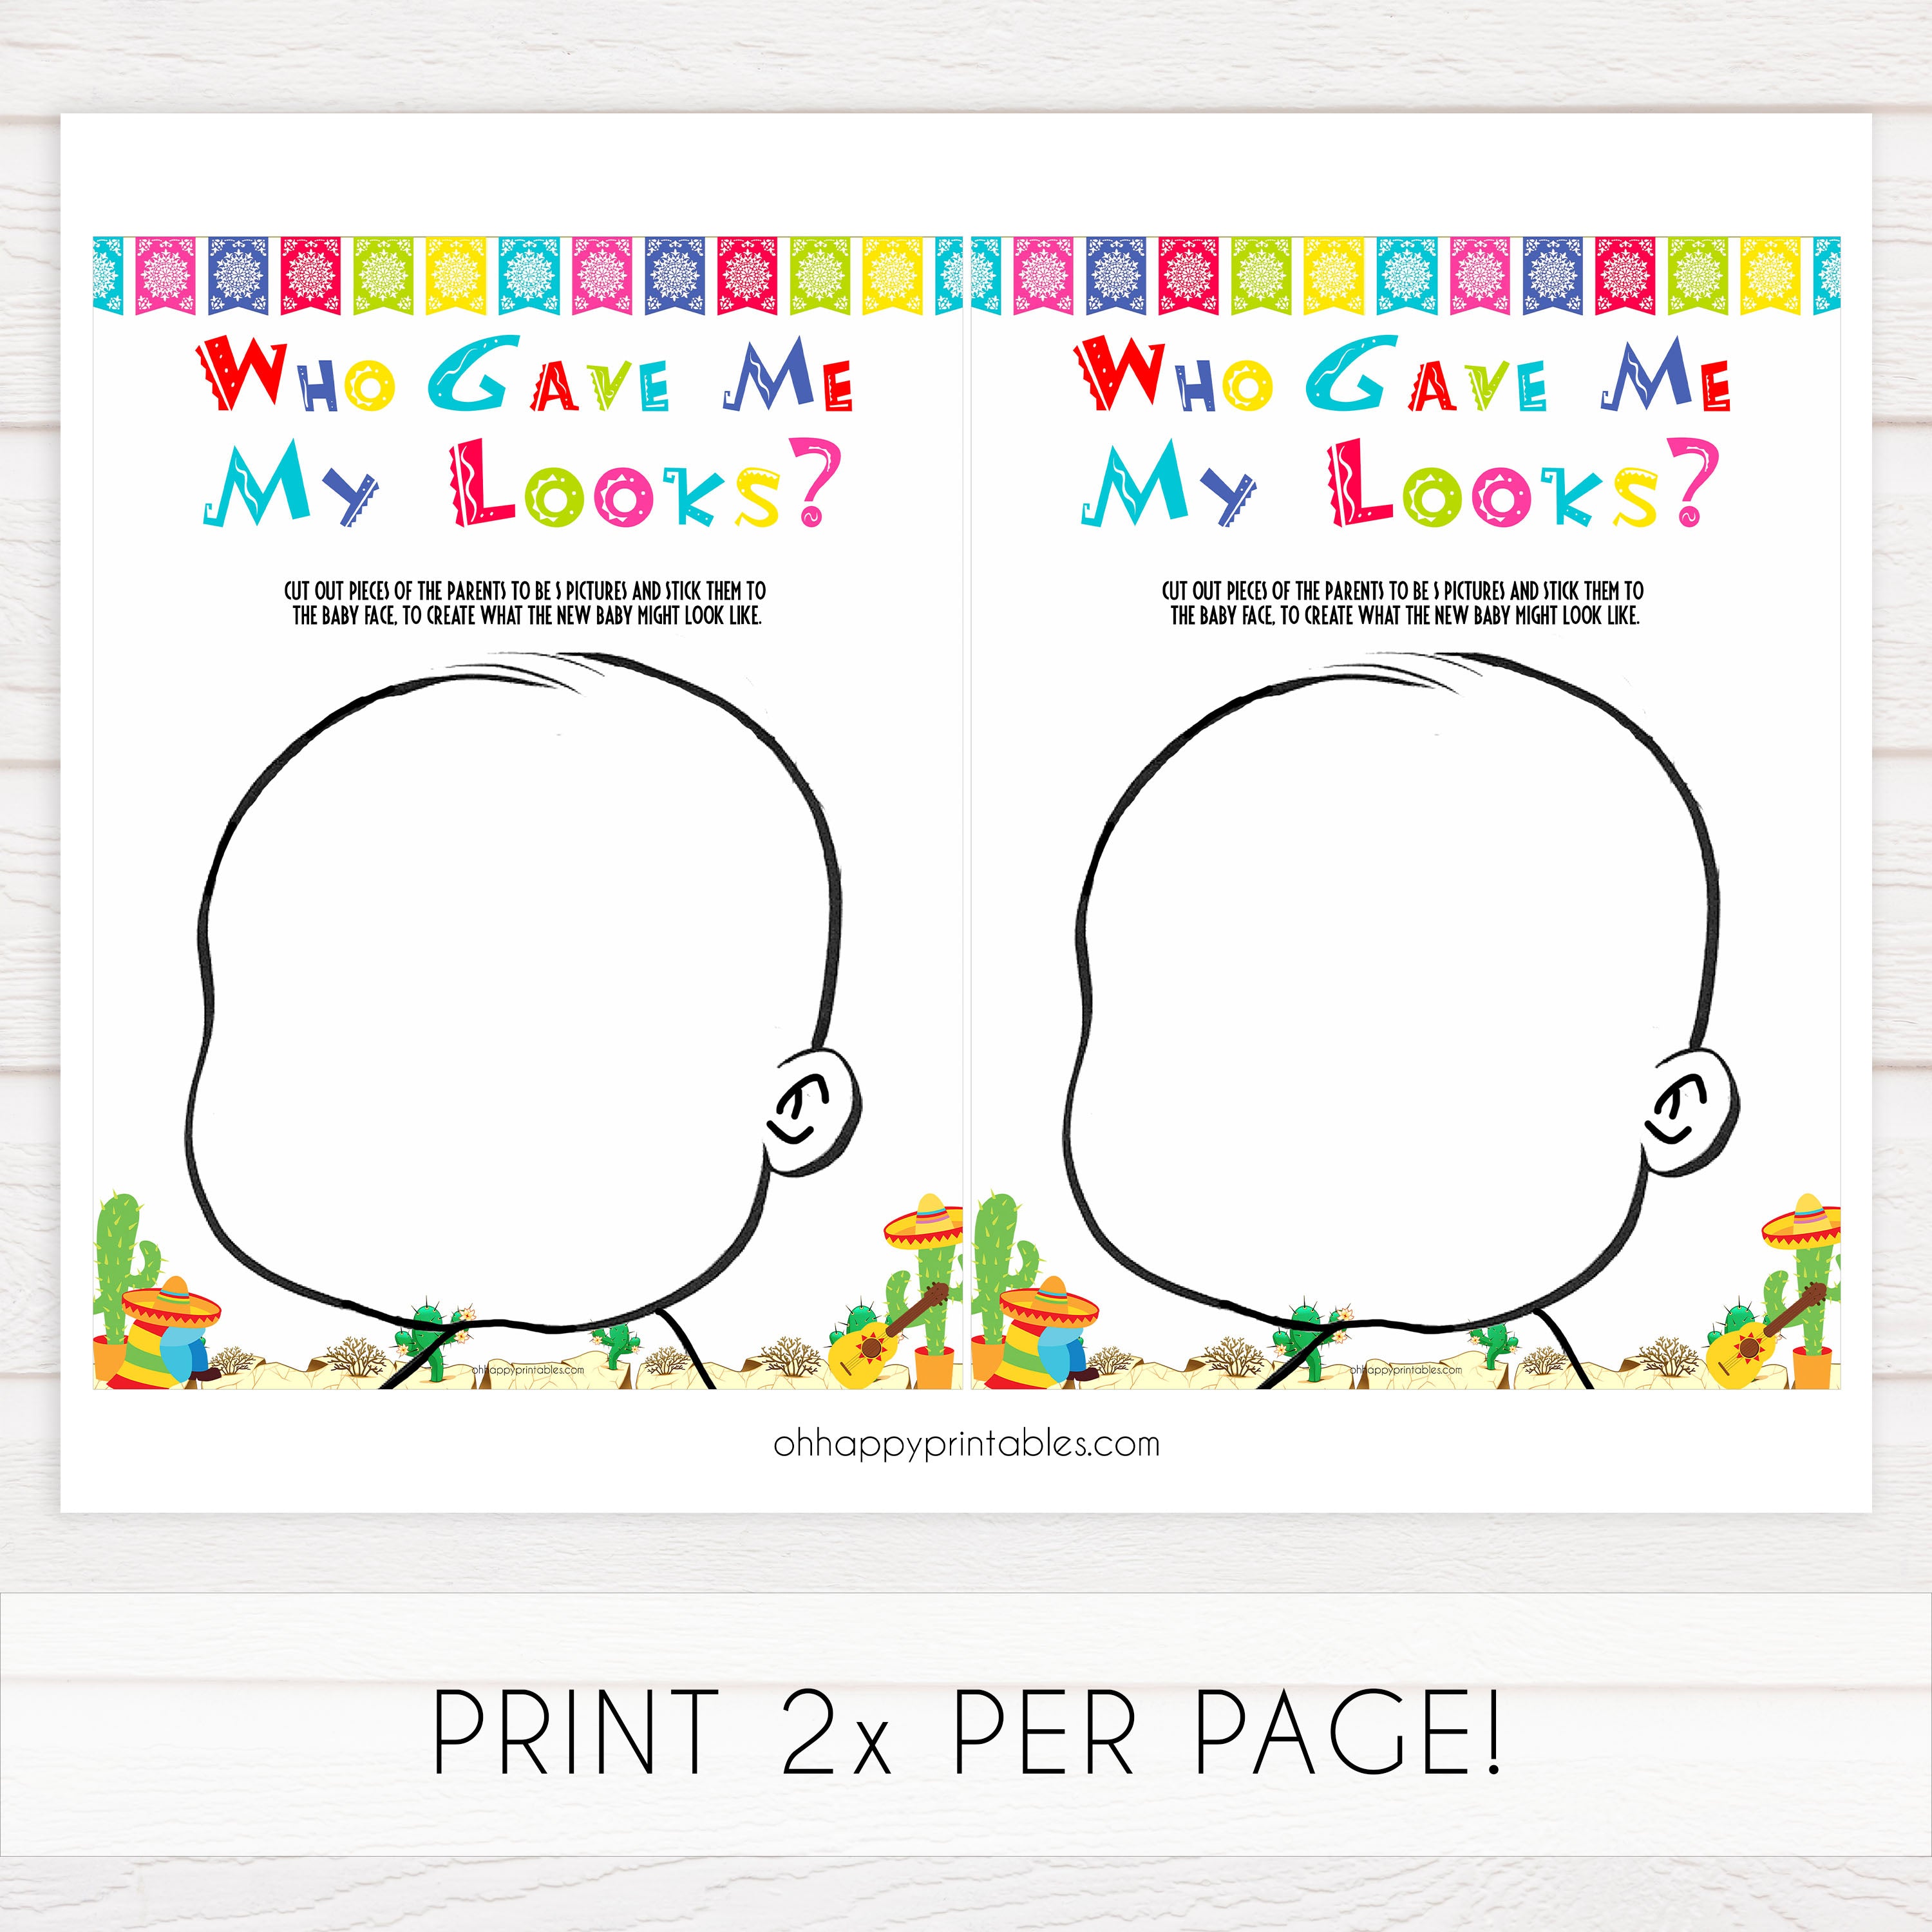 baby looks game, Printable baby shower games, Mexican fiesta fun baby games, baby shower games, fun baby shower ideas, top baby shower ideas, fiesta shower baby shower, fiesta baby shower ideas